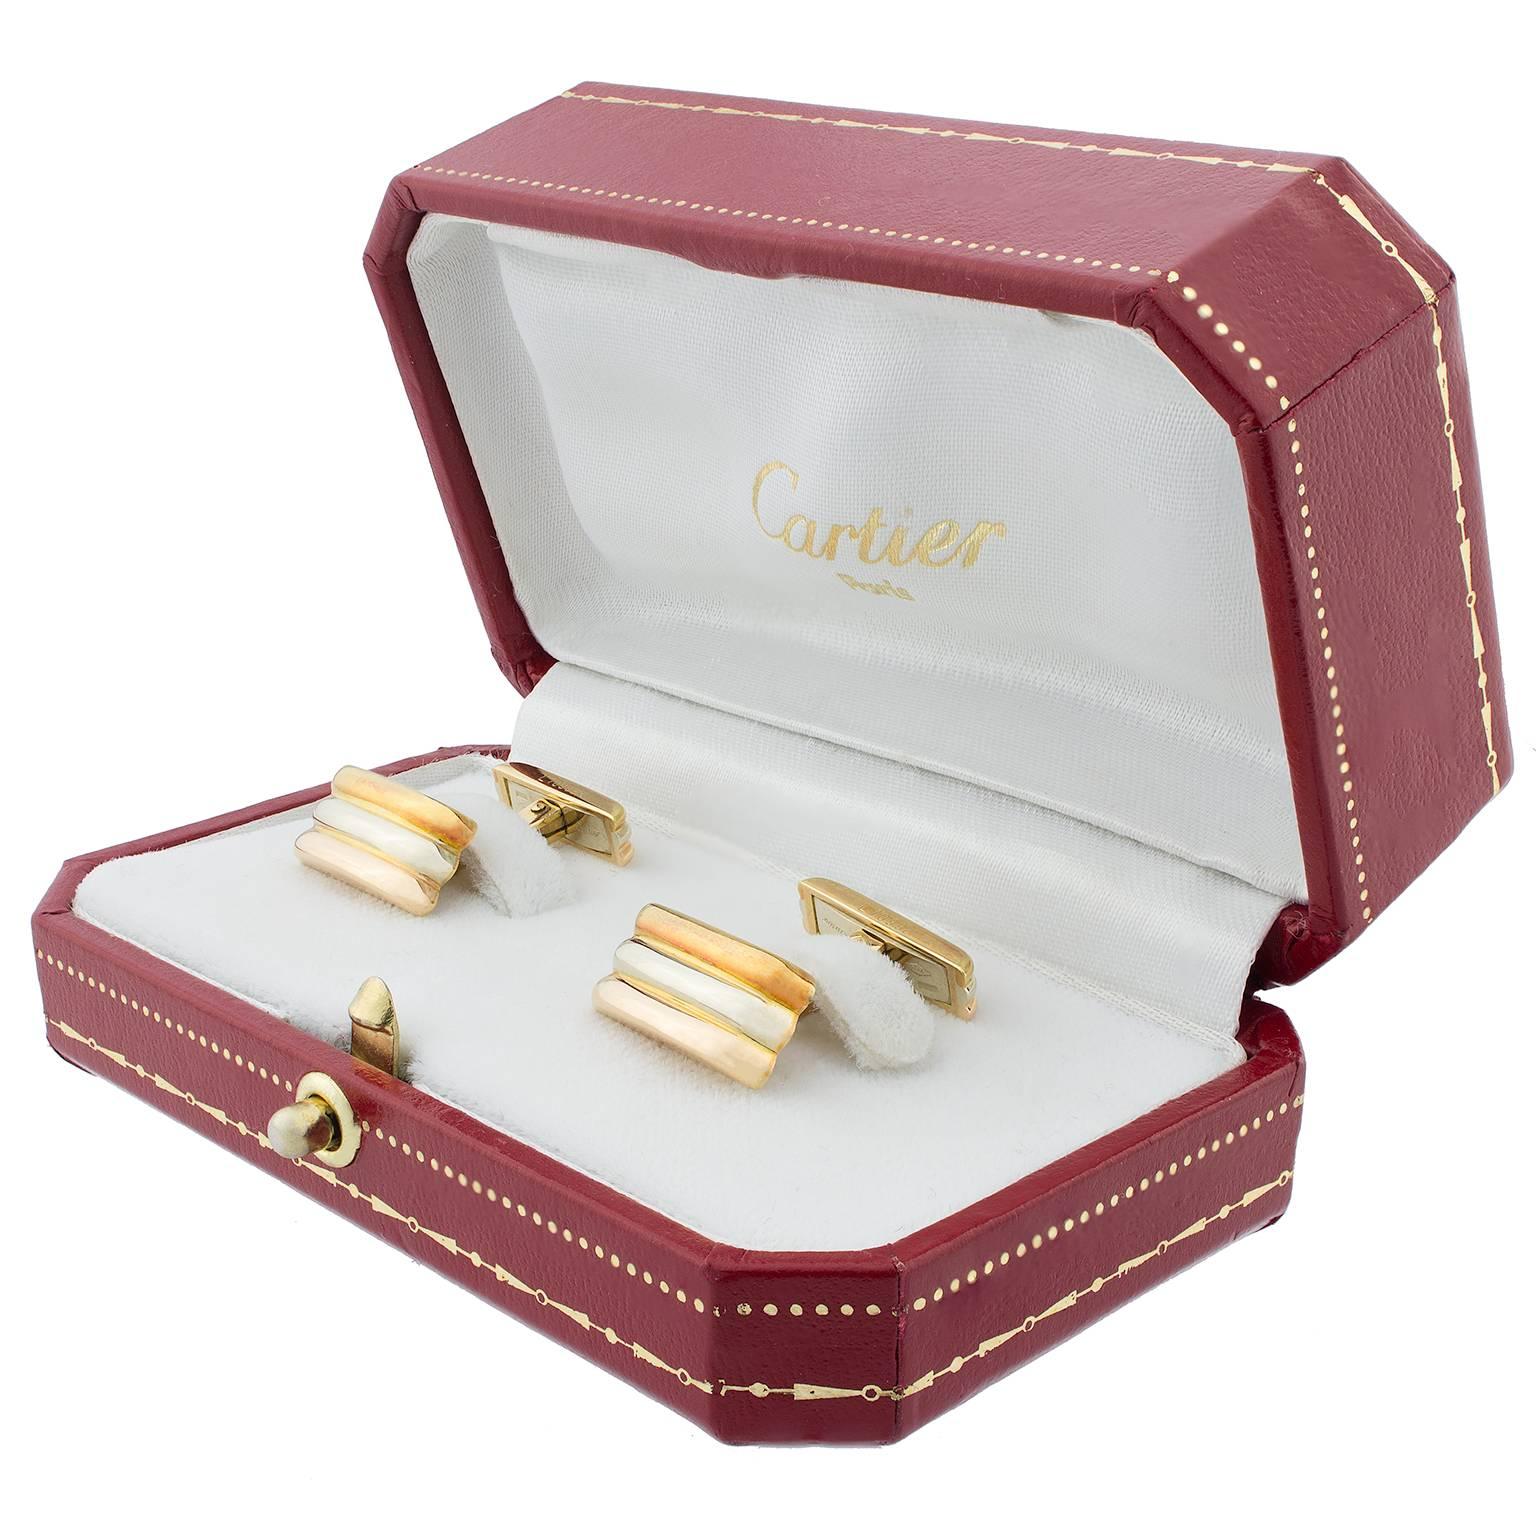 White, rose and yellow gold cufflinks by Cartier, from the Trinity de Cartier collection. Original box included.